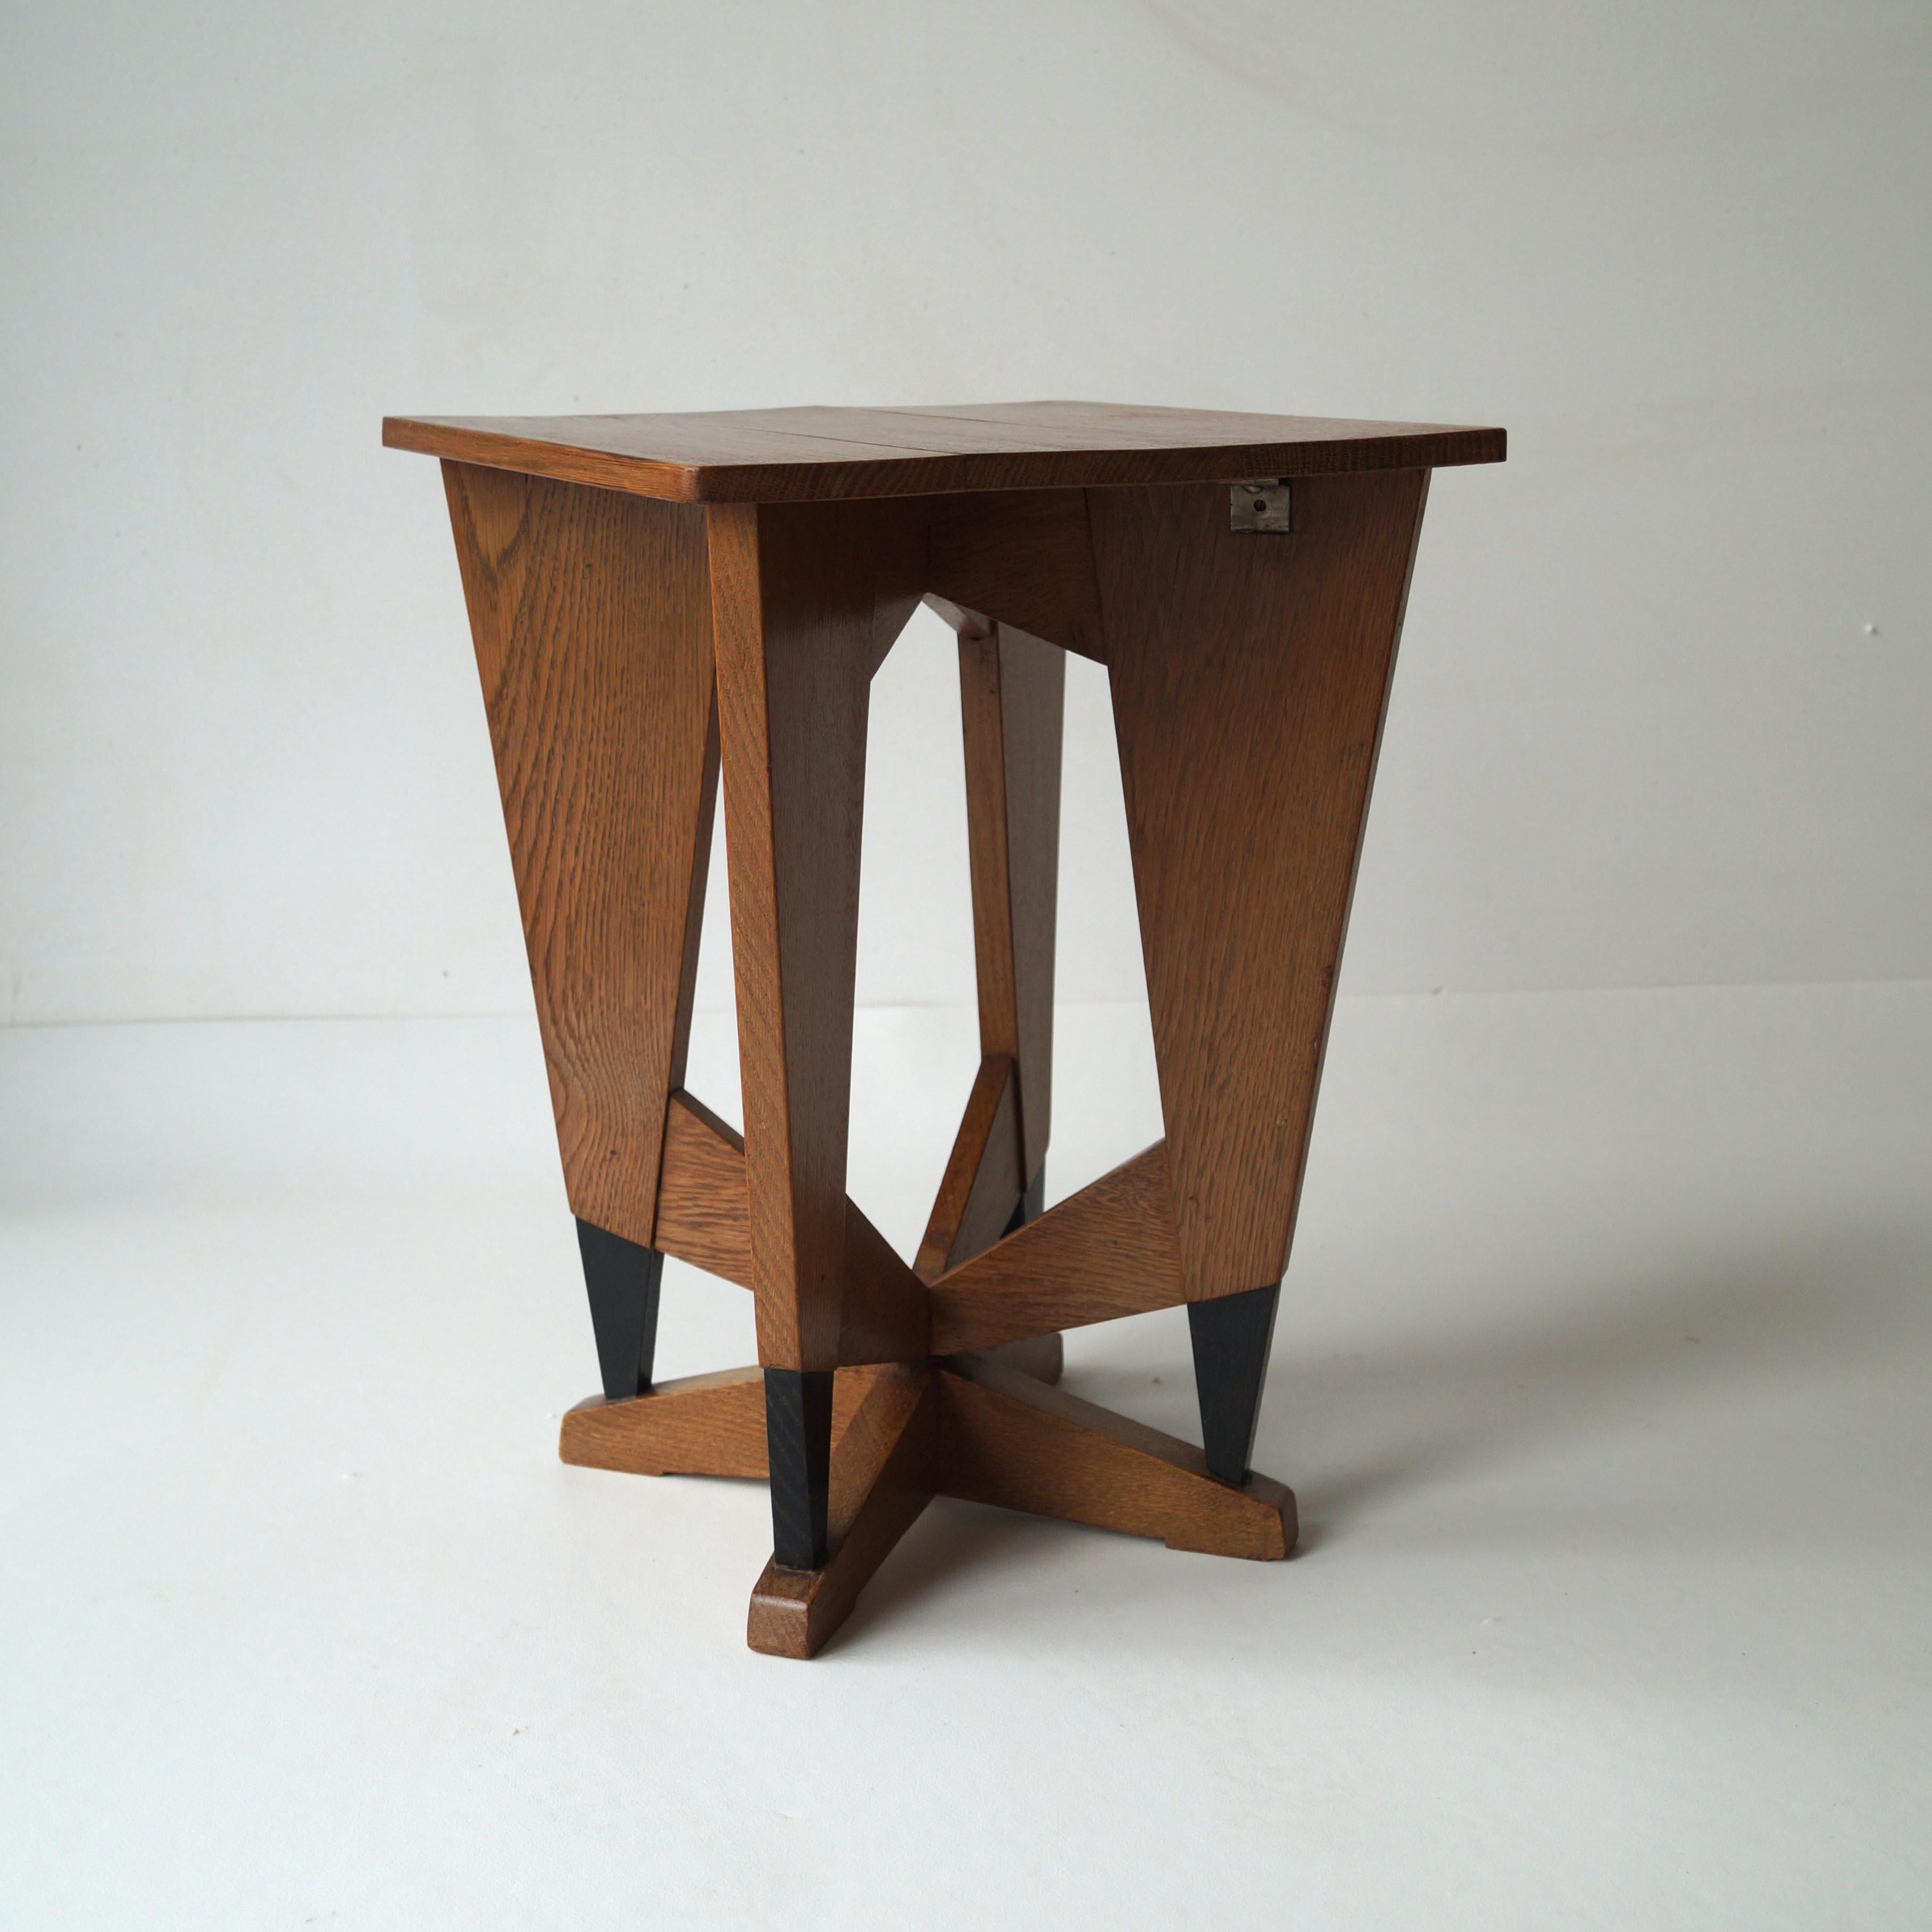 Hand-Crafted Dutch Art Deco Occasional Table by P.E.L. Izeren, 1920s For Sale